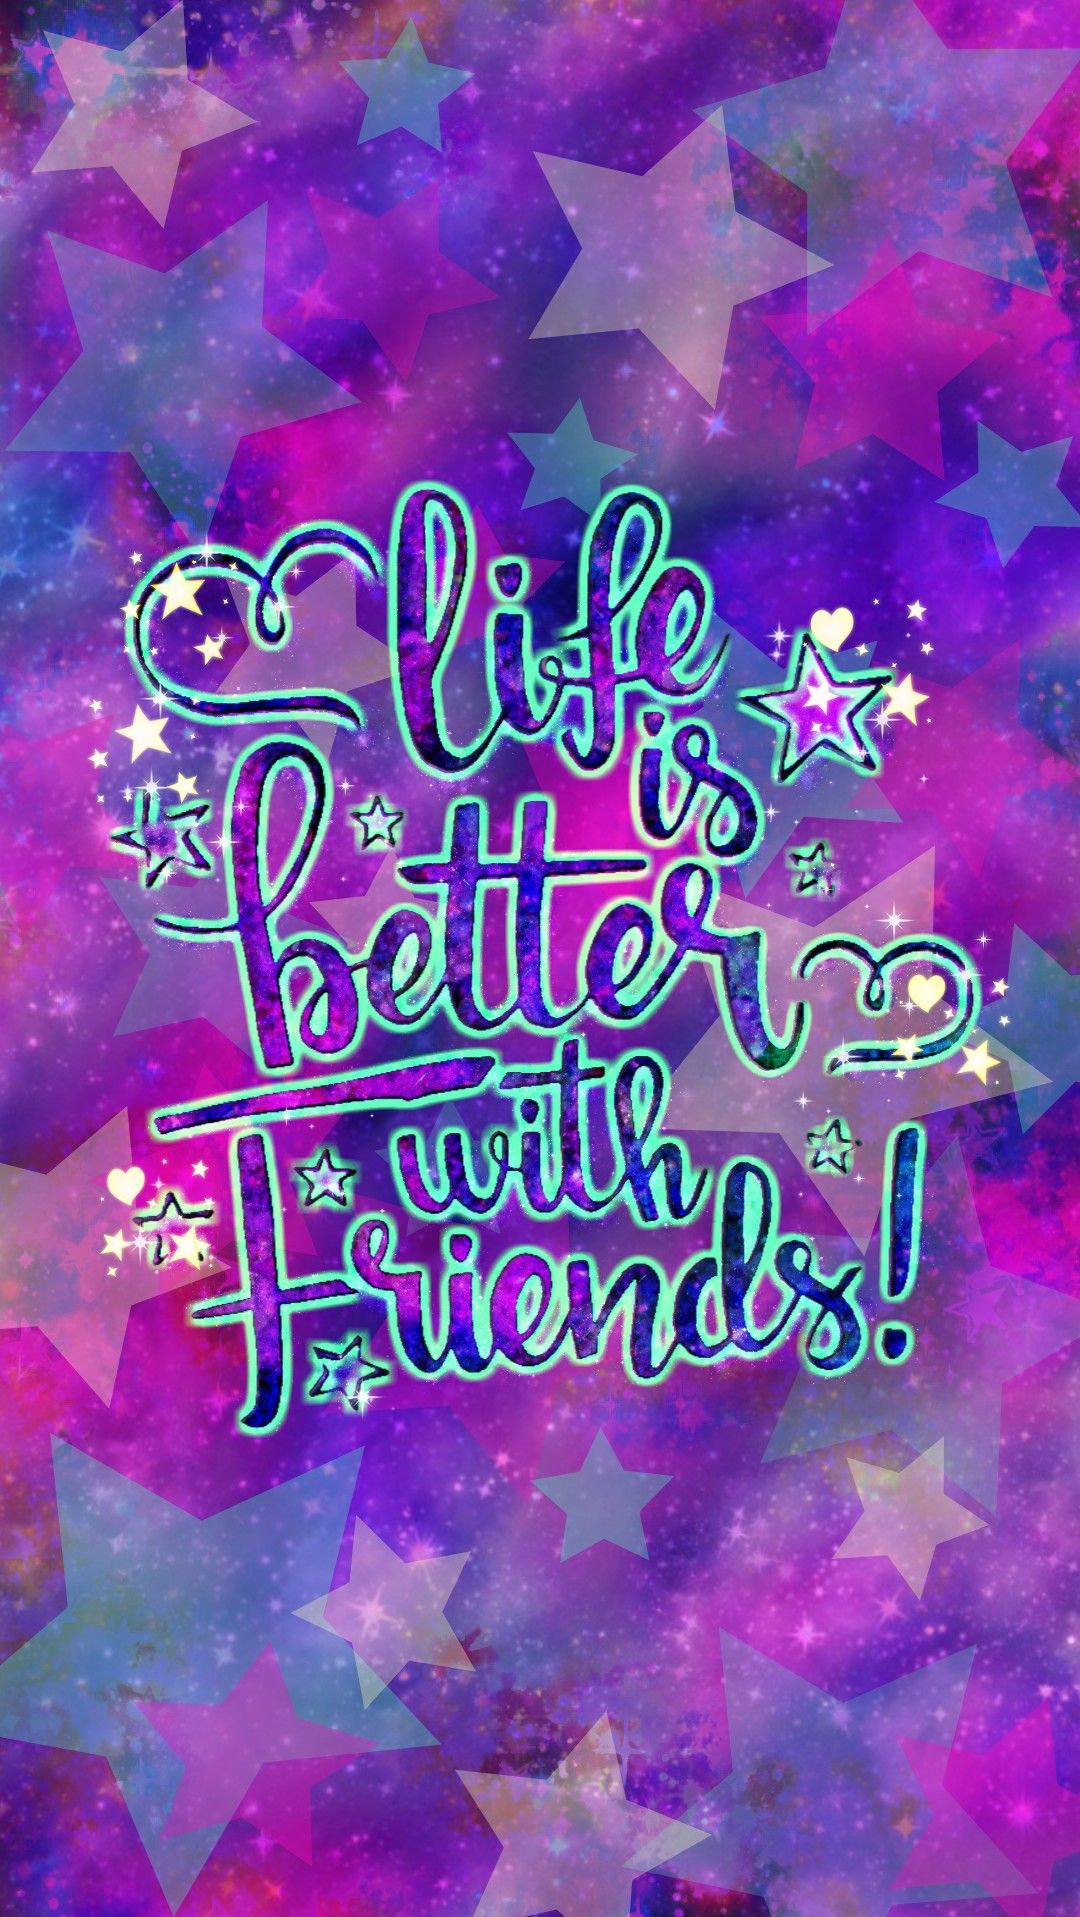 Best Friends Forever Wallpapers